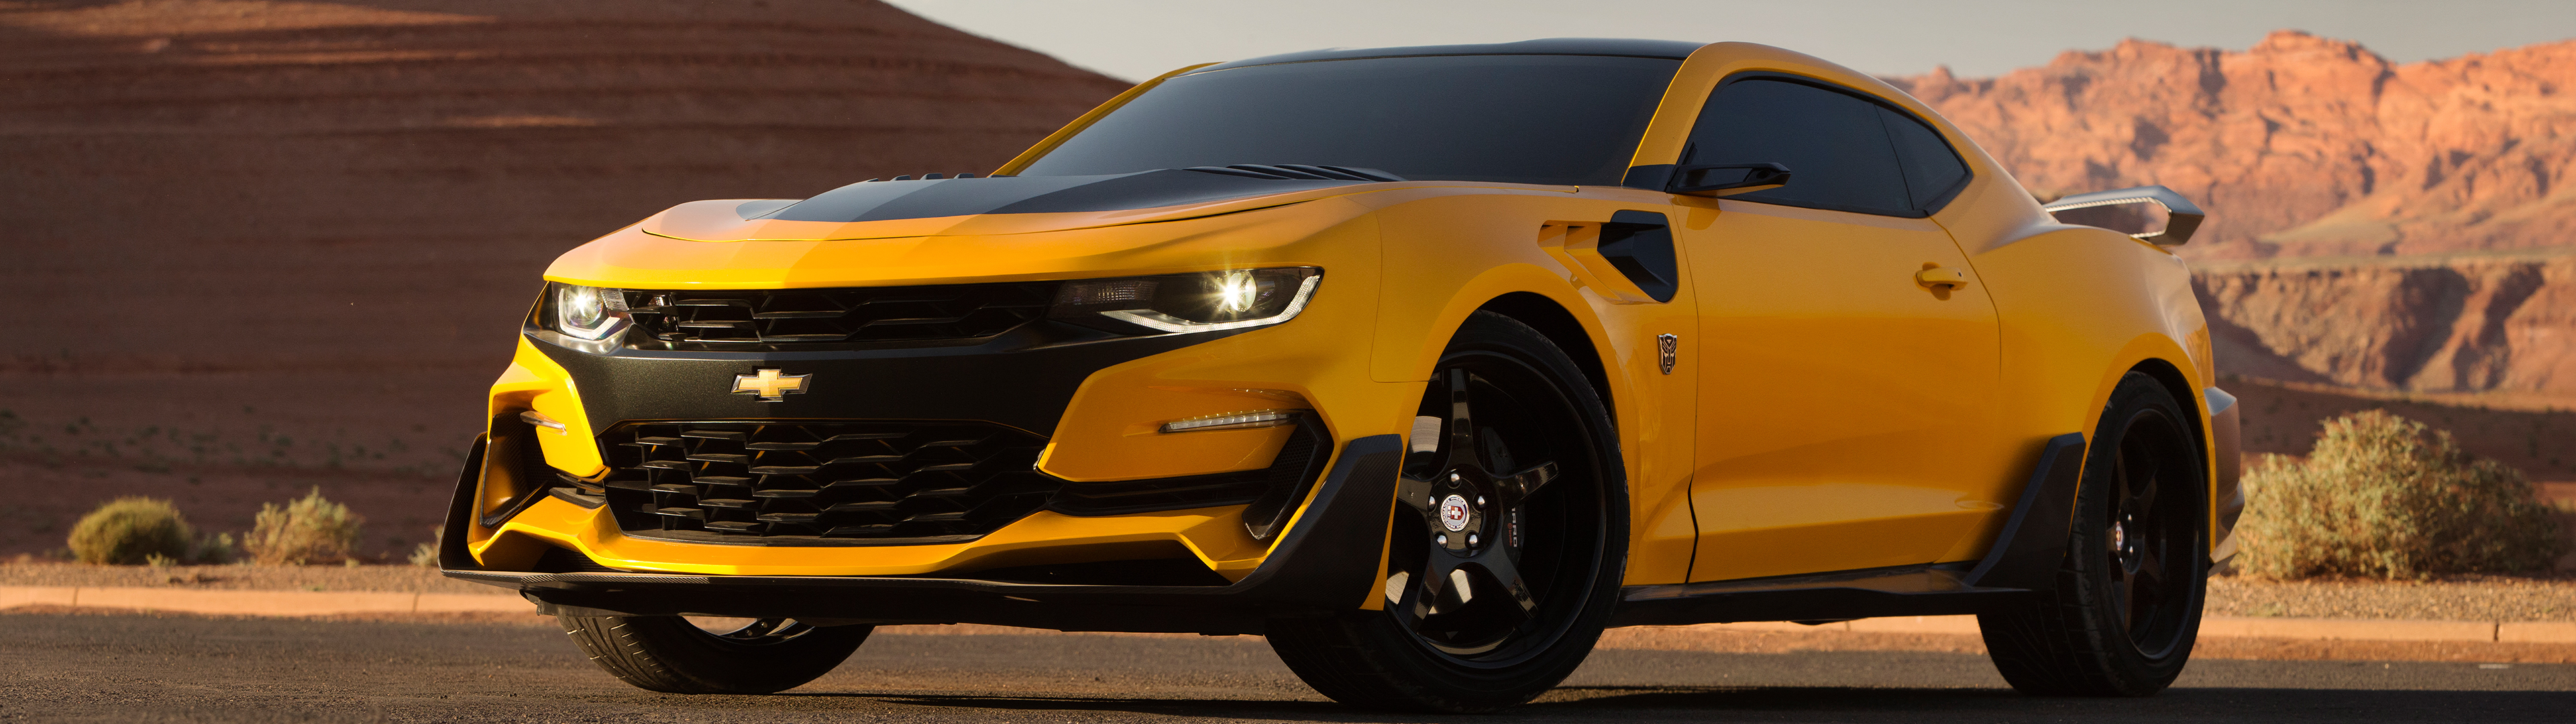 Transformers The Last Knight Bumblebee Chevrolet Camaro Bumblebee Multiple Display Dual Monitors Che 3840x1080